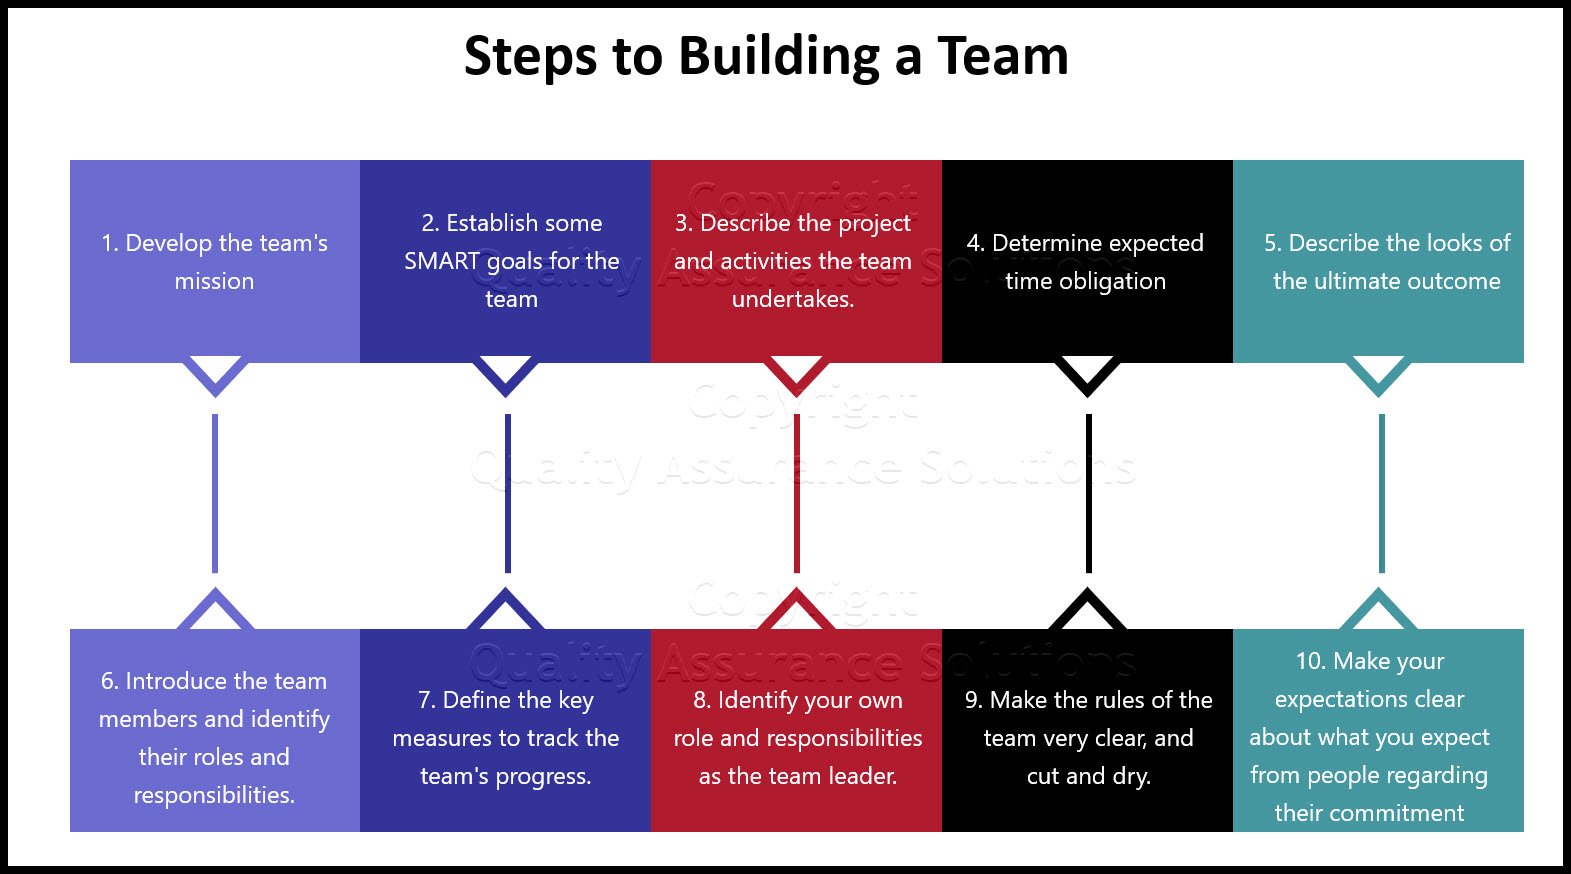 10 simple team building methods to get your team headed in the right direction and simplify your business.